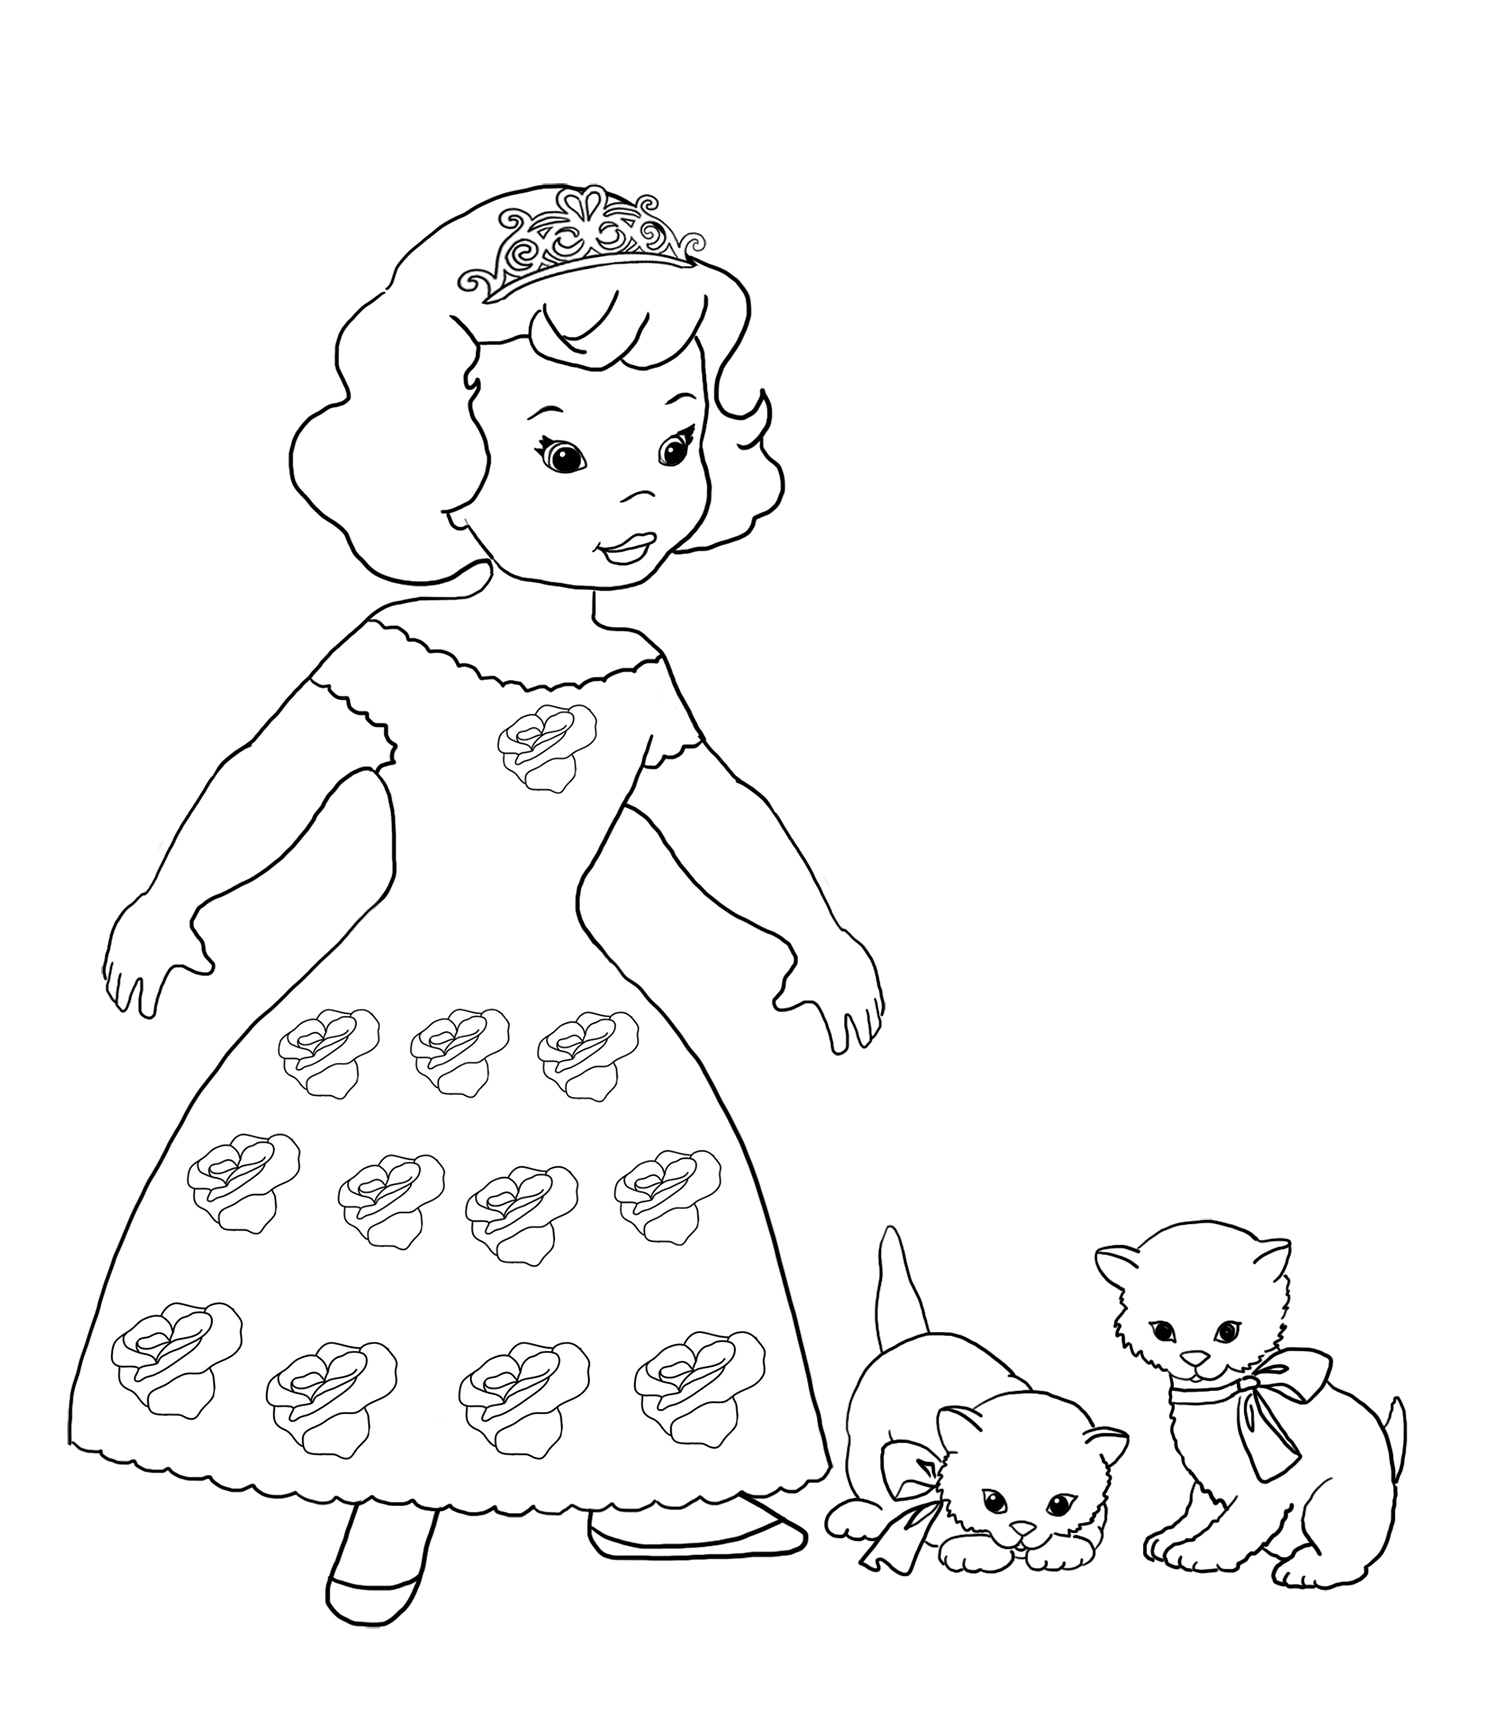 Coloring page with princess and kittens